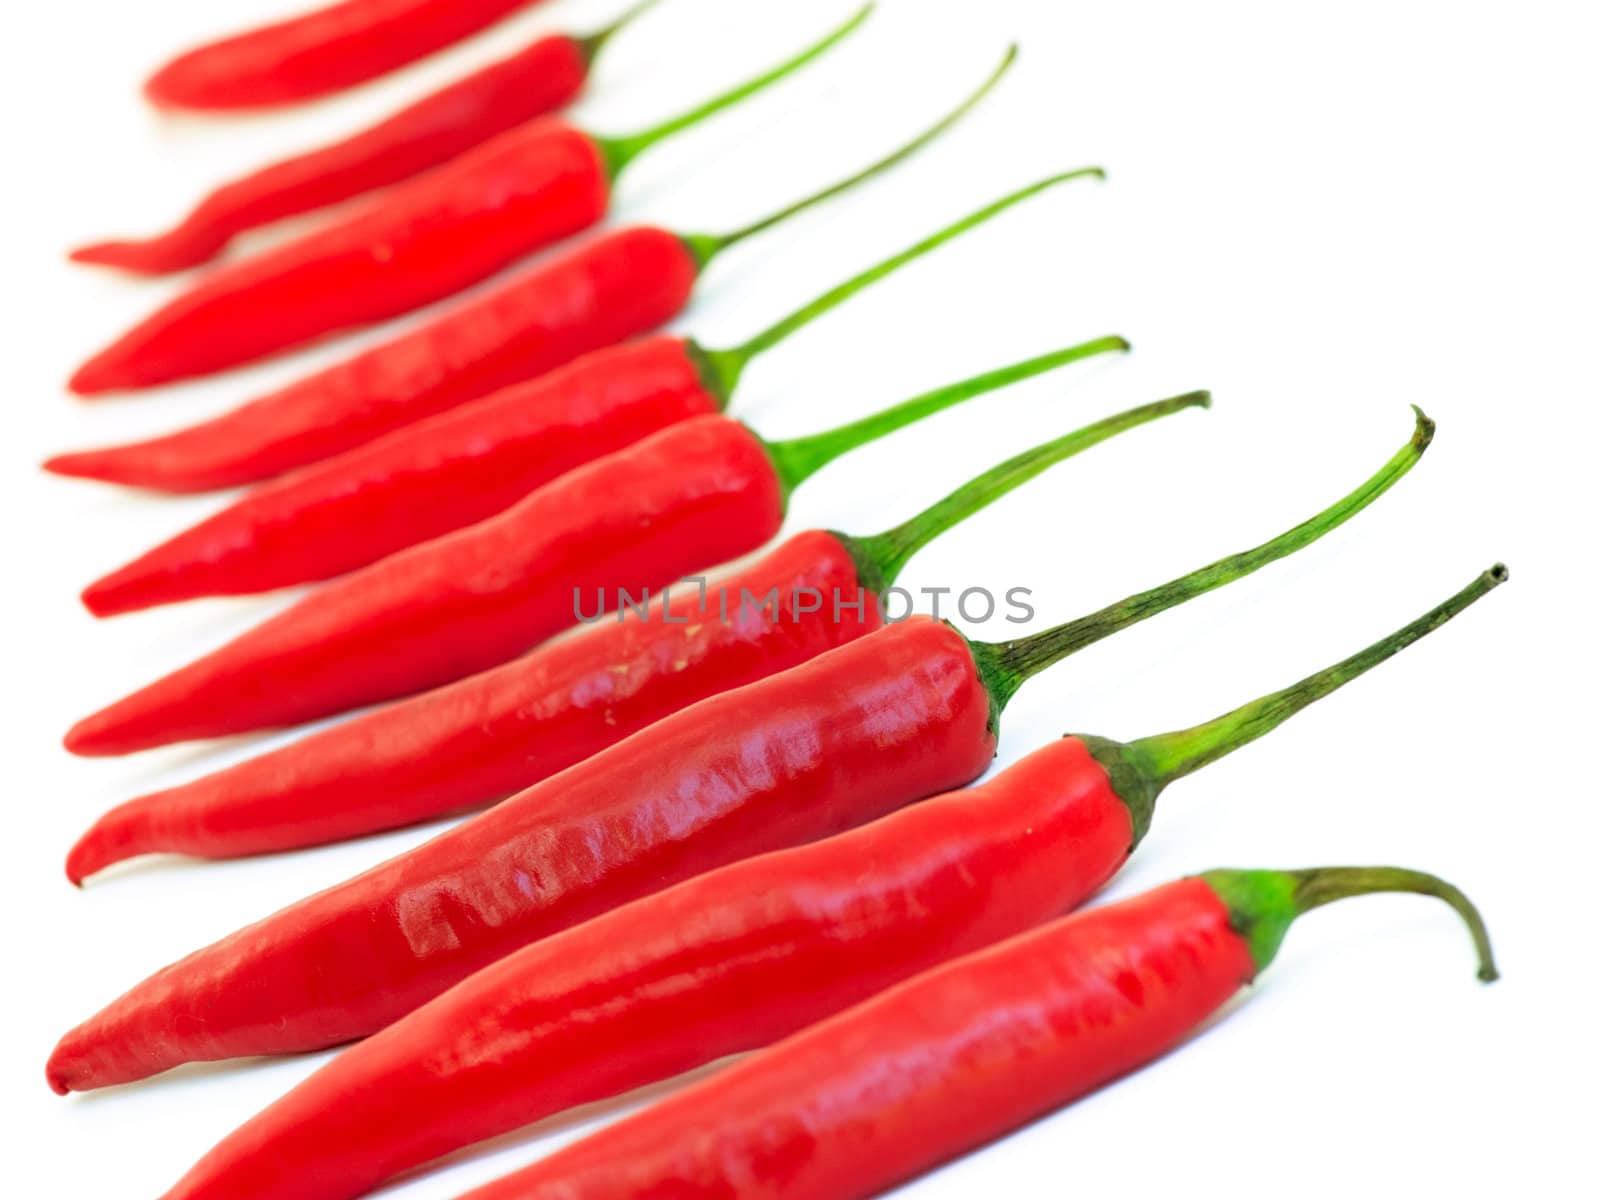 Chili peppers by naumoid